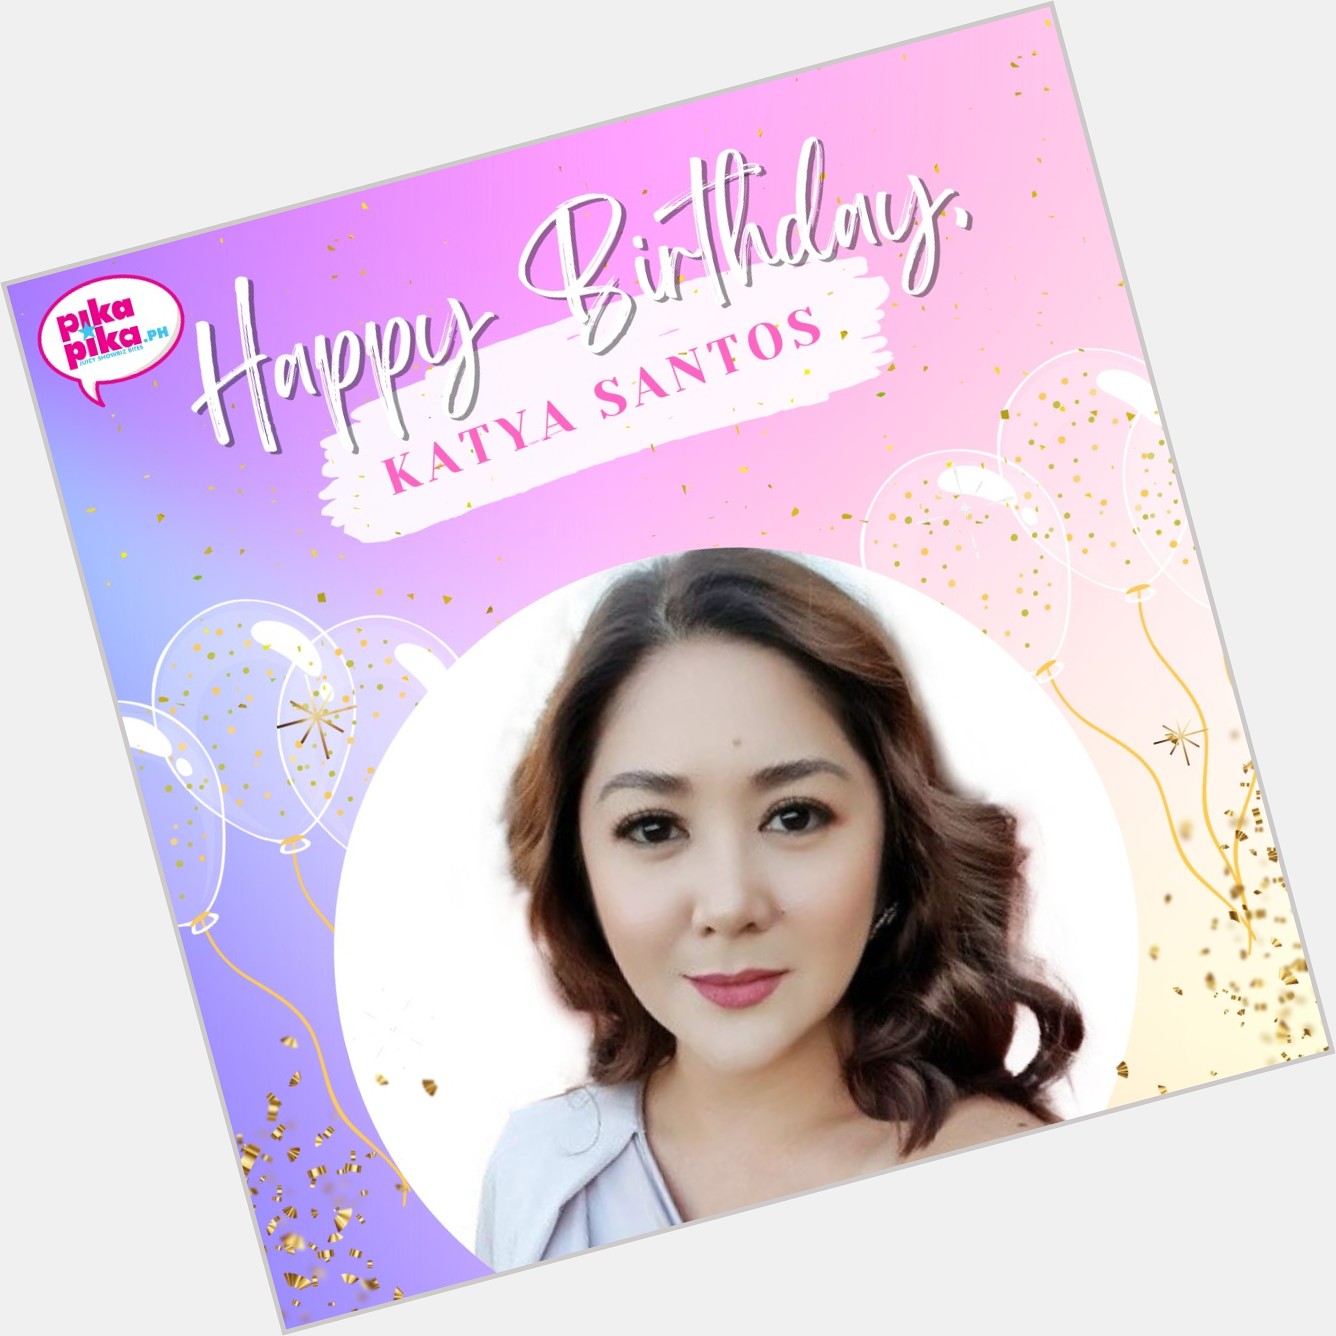 Happy birthday, Katya Santos! May your special day be filled wqith love and cheers.    